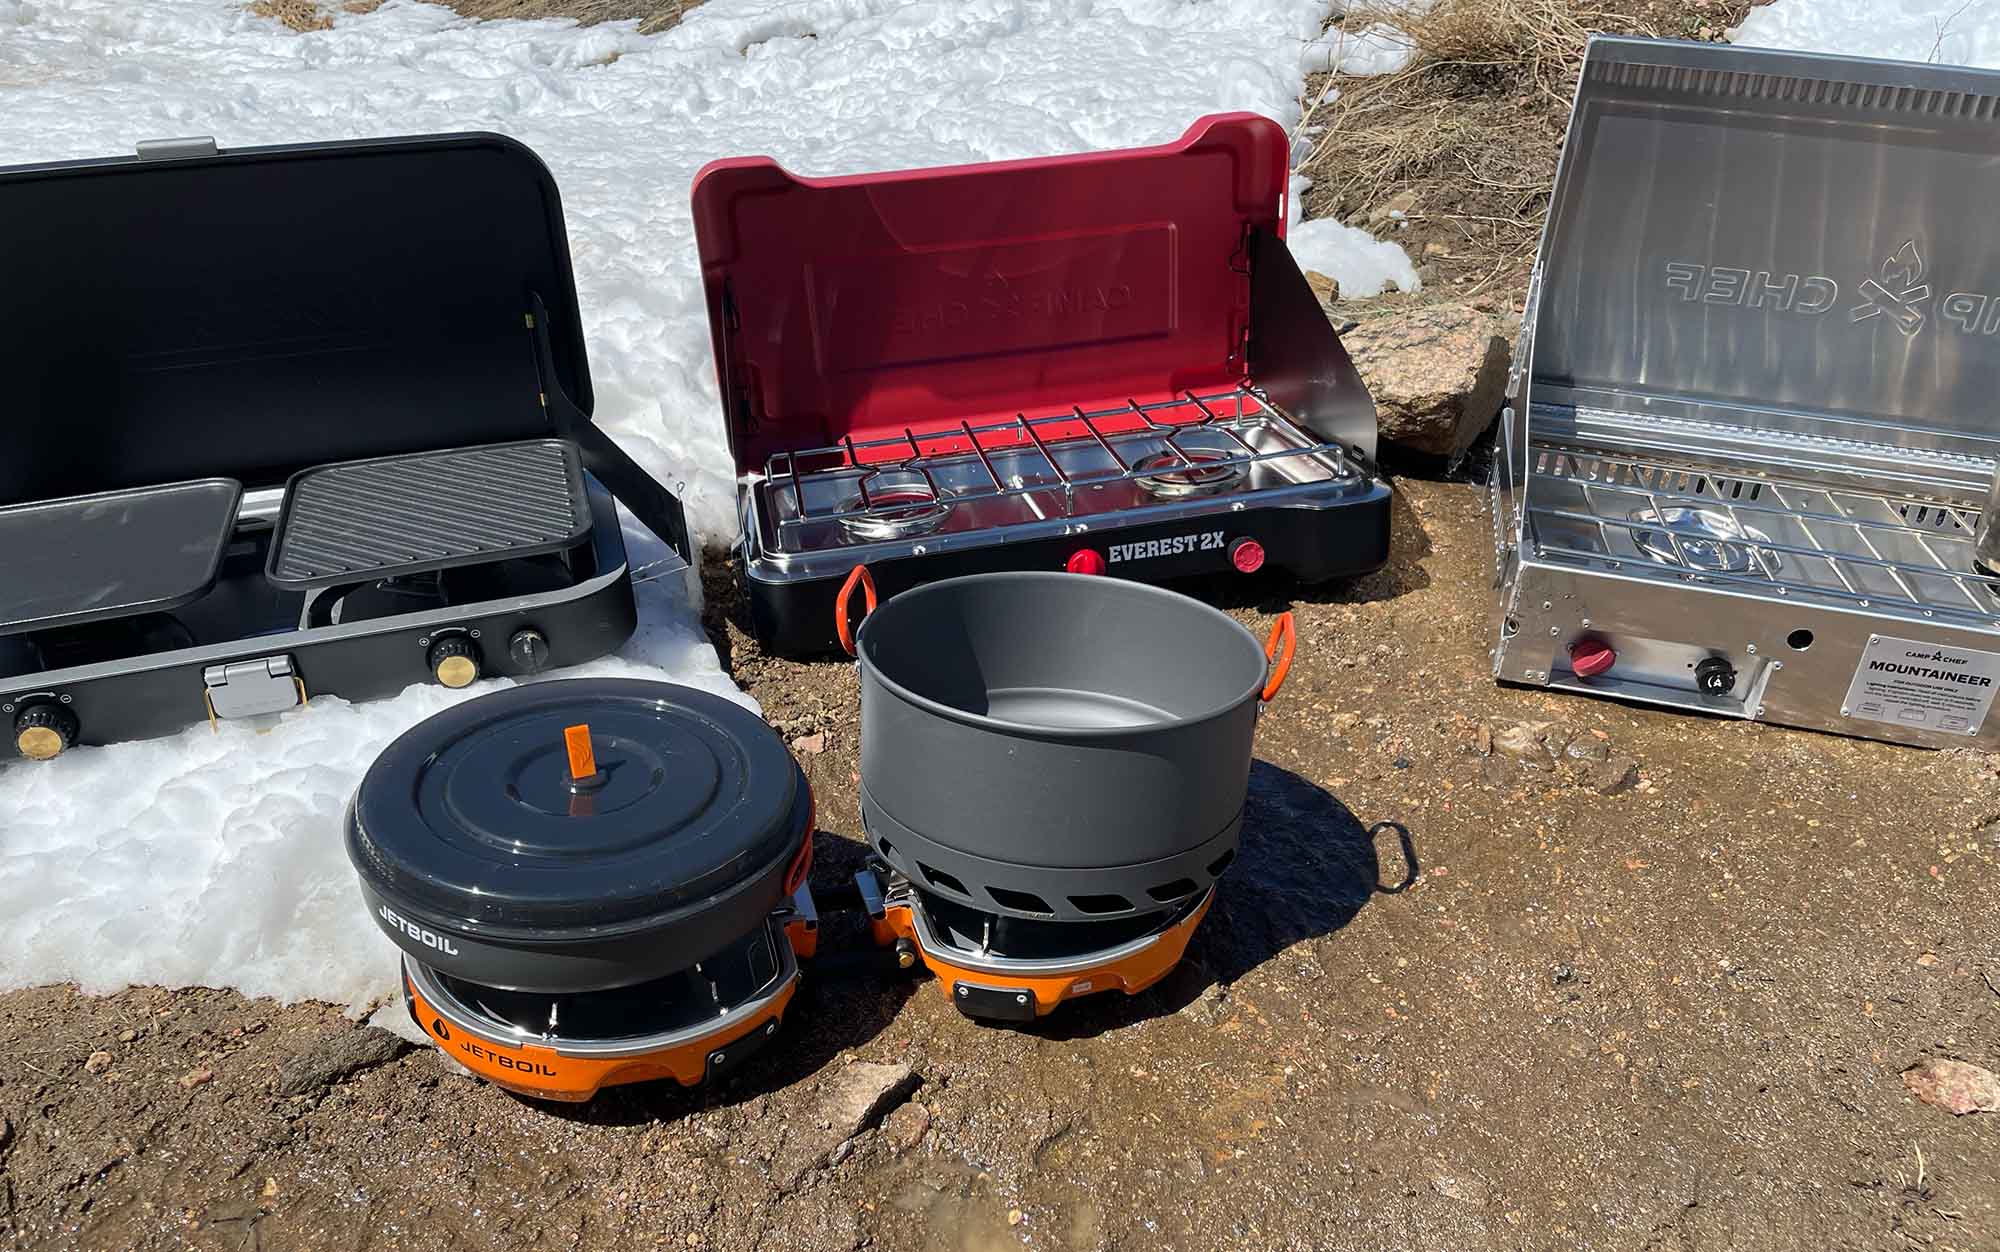 The best camp stoves sit in the snow.